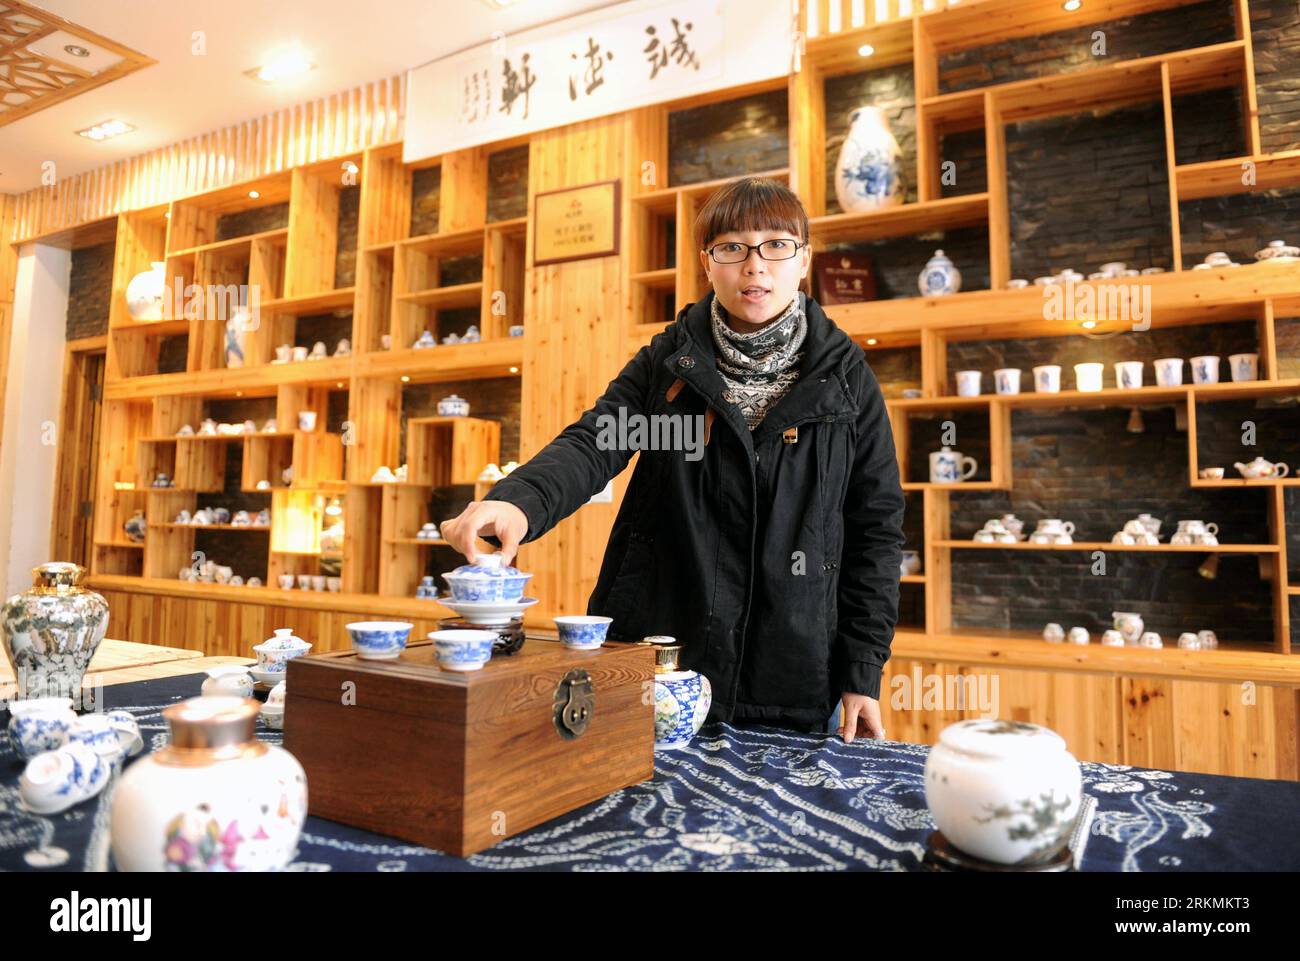 Bildnummer: 56778412  Datum: 21.12.2011  Copyright: imago/Xinhua (111223) -- JINGDEZHEN, Dec. 23, 2011 (Xinhua) -- A staff member introduces the products at a procelain workshop in Porcelain Capital Jingdezhen City, east China s Jiangxi Province, Dec. 21, 2011. Jingdezhen s percelain has been famous not only in China but in time it became known internationally for being as thin as paper, as white as jade, as bright as a mirror, and as sound as a bell. (Xinhua/Zhou Ke) (xzj) CHINA-JIANGXI-JINGDEZHEN-PORCELAIN (CN) PUBLICATIONxNOTxINxCHN Wirtschaft Porzellan Arbeitswelten Handwerk Gesellschaft x Stock Photo